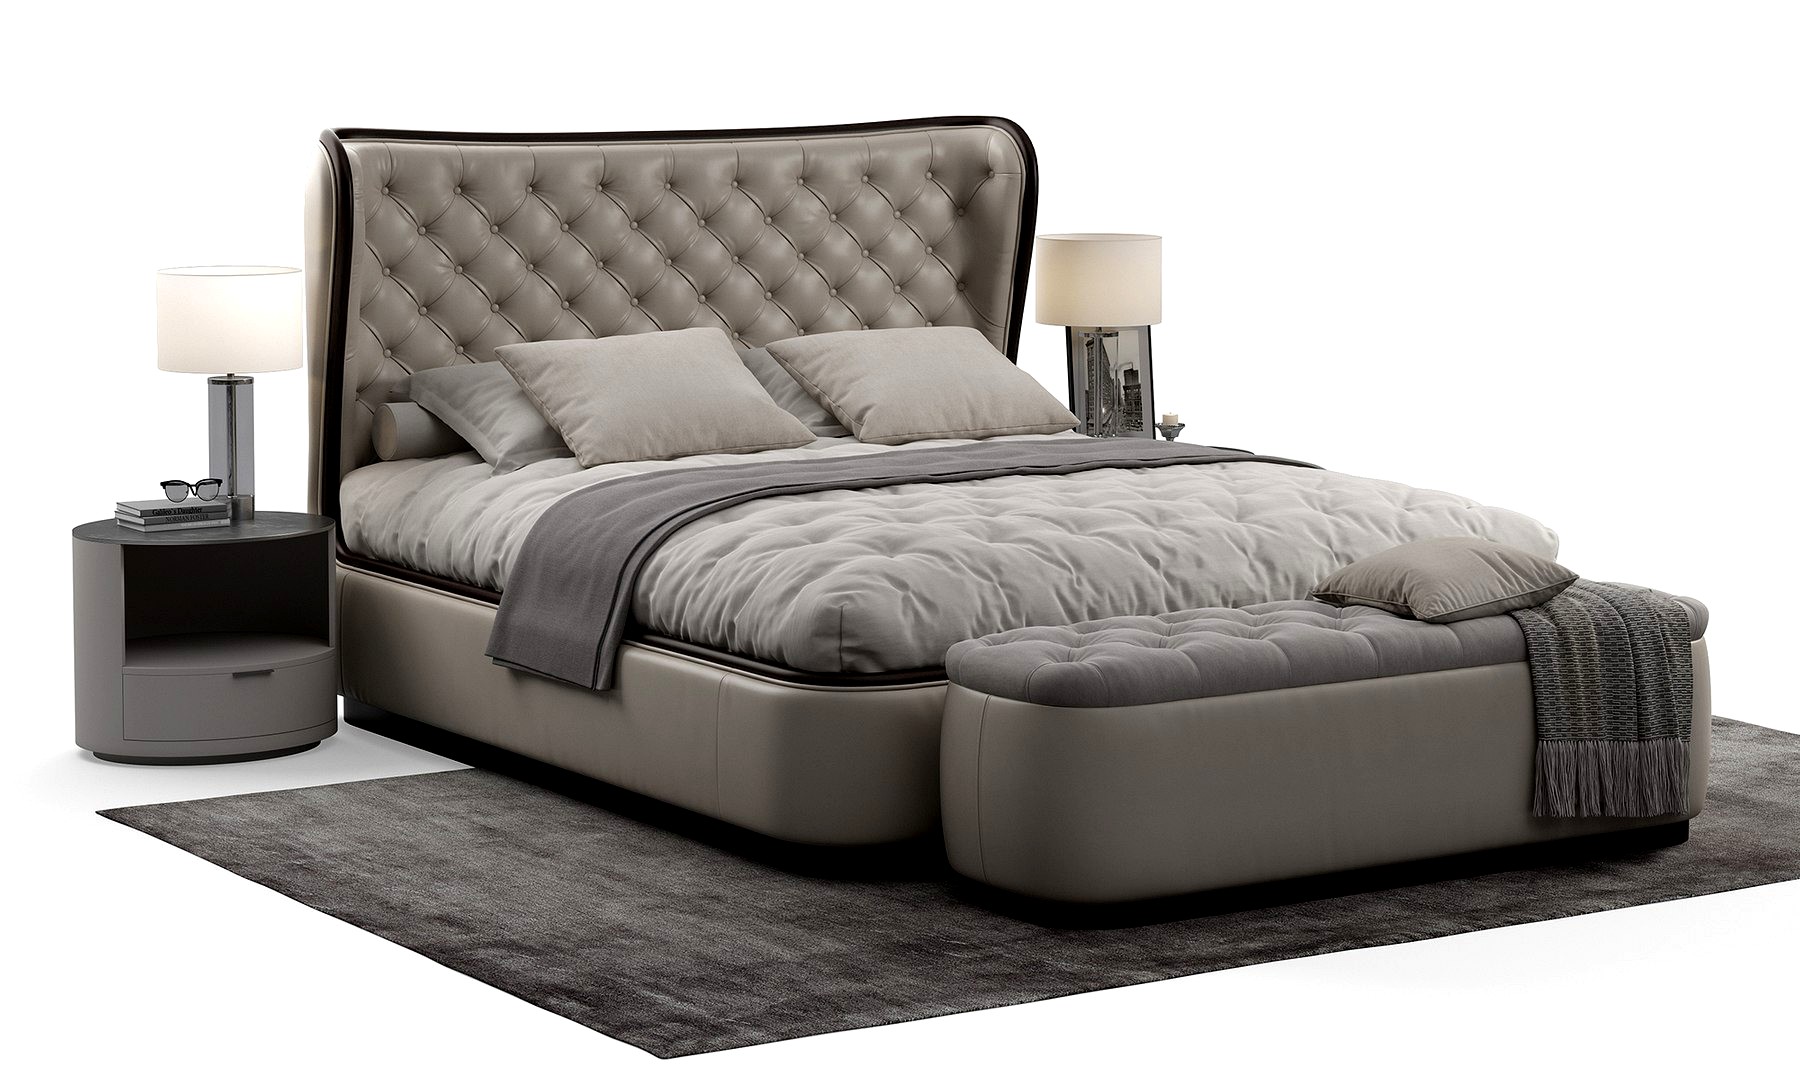 Media Lifestyle 1905 Margot Bedroom collection